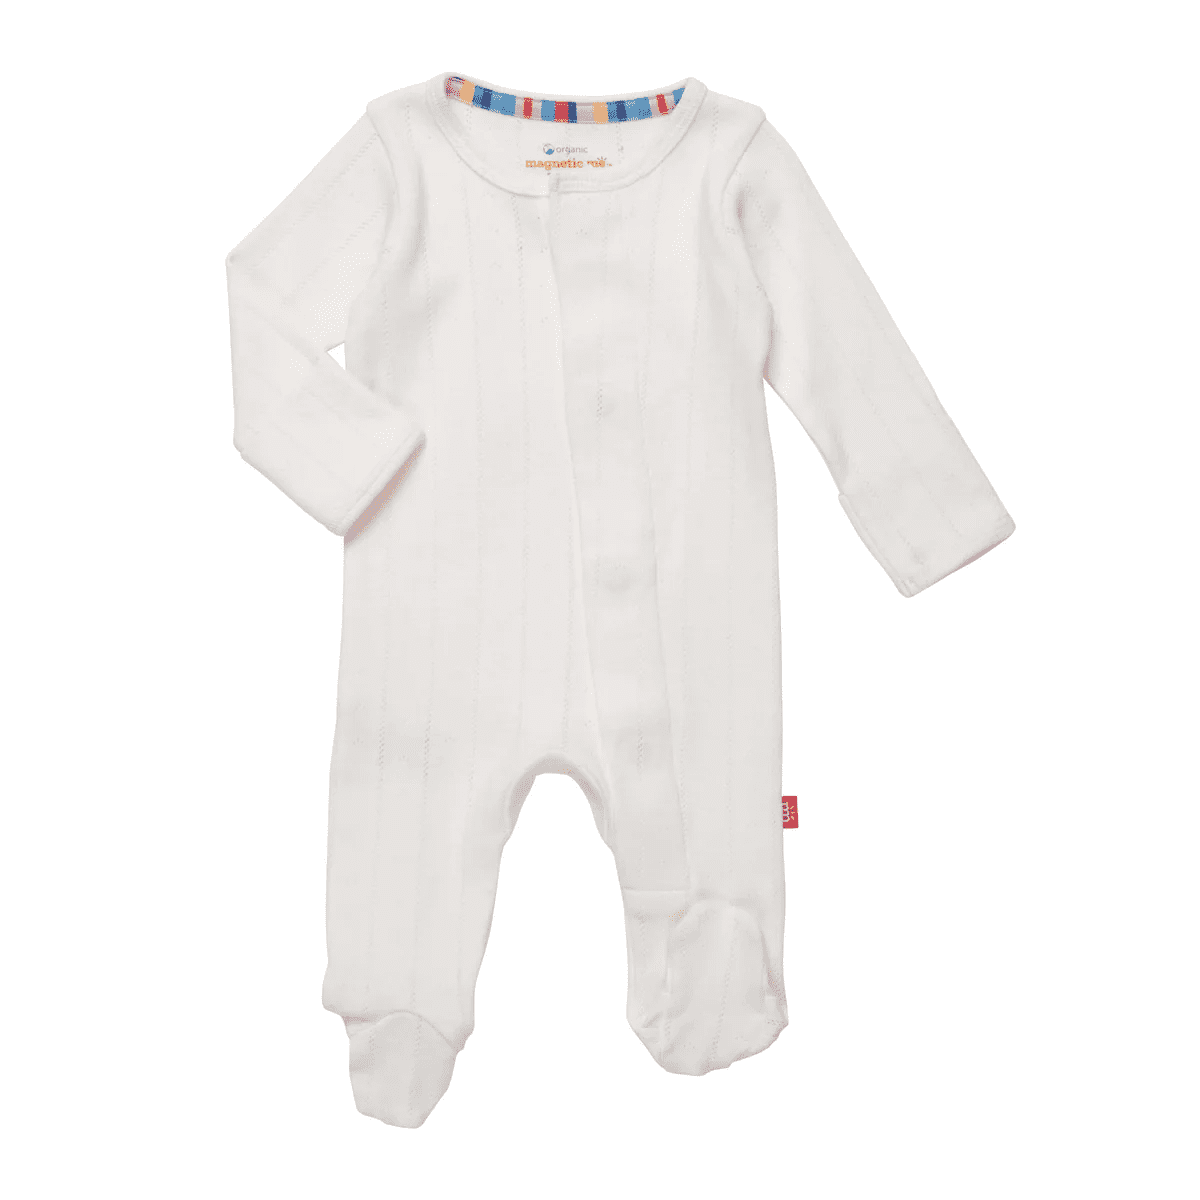 Love Lines Pointelle Onesie – Tofu | Magnetic Me | Iris Gifts & Décor